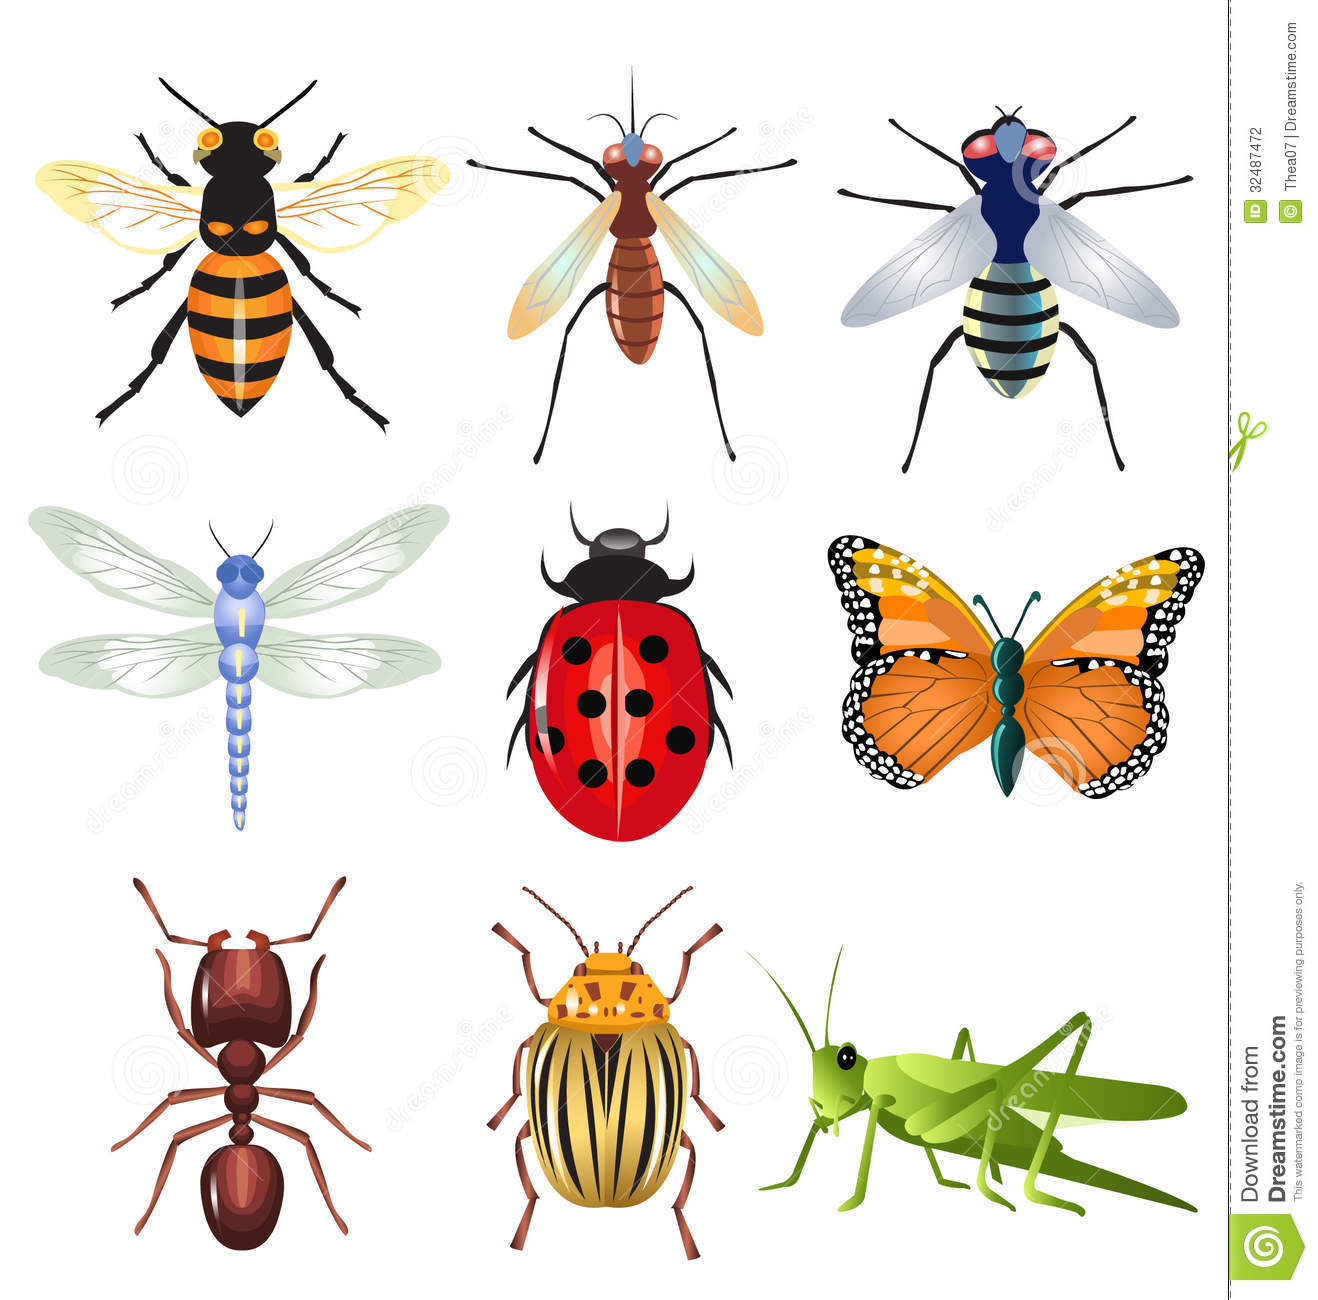 1000+ images about Insects on Pinterest.